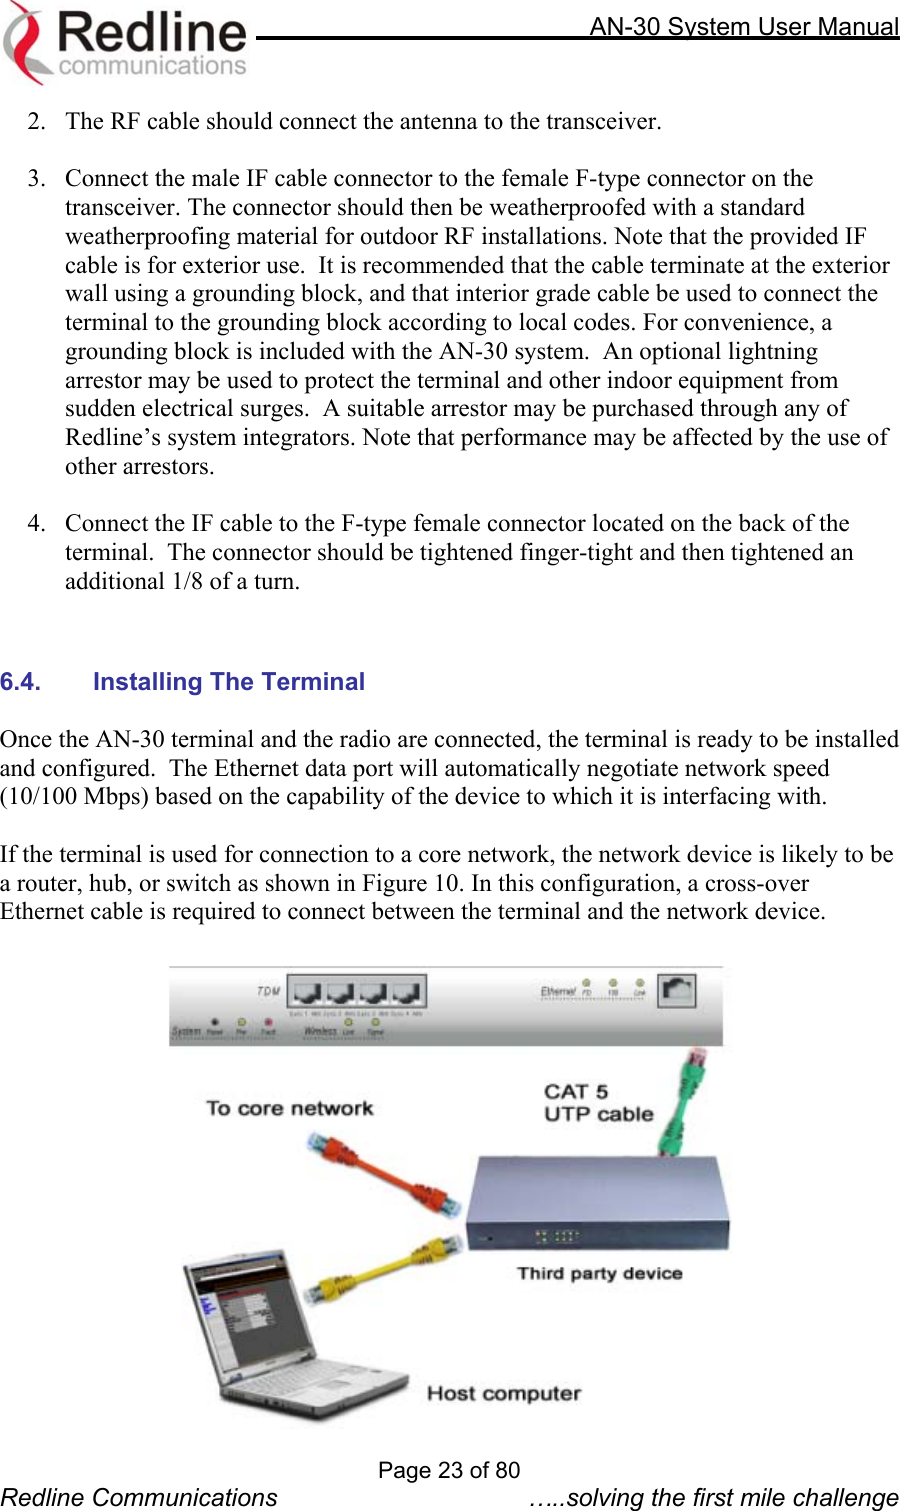     AN-30 System User Manual  2.  The RF cable should connect the antenna to the transceiver.   3.  Connect the male IF cable connector to the female F-type connector on the transceiver. The connector should then be weatherproofed with a standard weatherproofing material for outdoor RF installations. Note that the provided IF cable is for exterior use.  It is recommended that the cable terminate at the exterior wall using a grounding block, and that interior grade cable be used to connect the terminal to the grounding block according to local codes. For convenience, a grounding block is included with the AN-30 system.  An optional lightning arrestor may be used to protect the terminal and other indoor equipment from sudden electrical surges.  A suitable arrestor may be purchased through any of Redline’s system integrators. Note that performance may be affected by the use of other arrestors.  4.  Connect the IF cable to the F-type female connector located on the back of the terminal.  The connector should be tightened finger-tight and then tightened an additional 1/8 of a turn.    6.4. Installing The Terminal  Once the AN-30 terminal and the radio are connected, the terminal is ready to be installed and configured.  The Ethernet data port will automatically negotiate network speed (10/100 Mbps) based on the capability of the device to which it is interfacing with.  If the terminal is used for connection to a core network, the network device is likely to be a router, hub, or switch as shown in Figure 10. In this configuration, a cross-over Ethernet cable is required to connect between the terminal and the network device.   Page 23 of 80 Redline Communications  …..solving the first mile challenge 